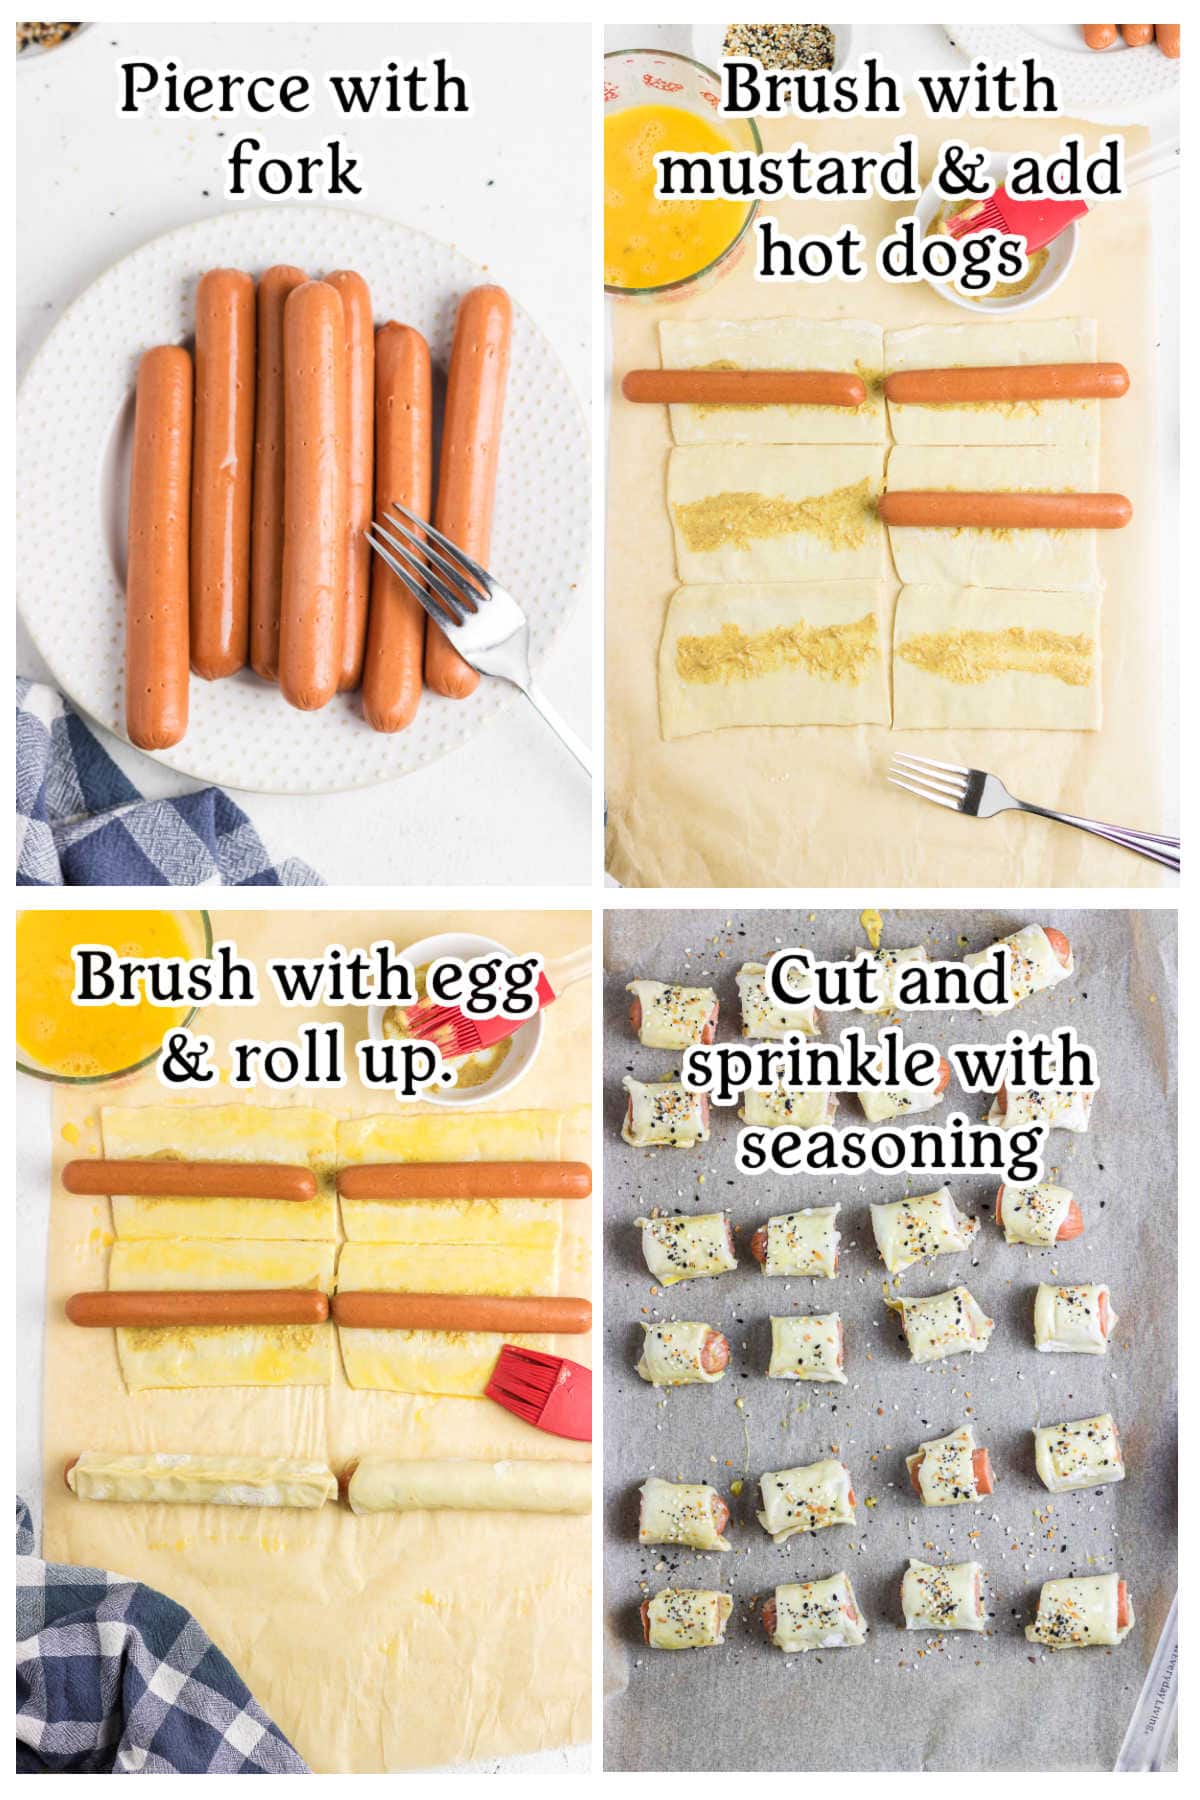 Four images with text overlay depicting the recipe steps.